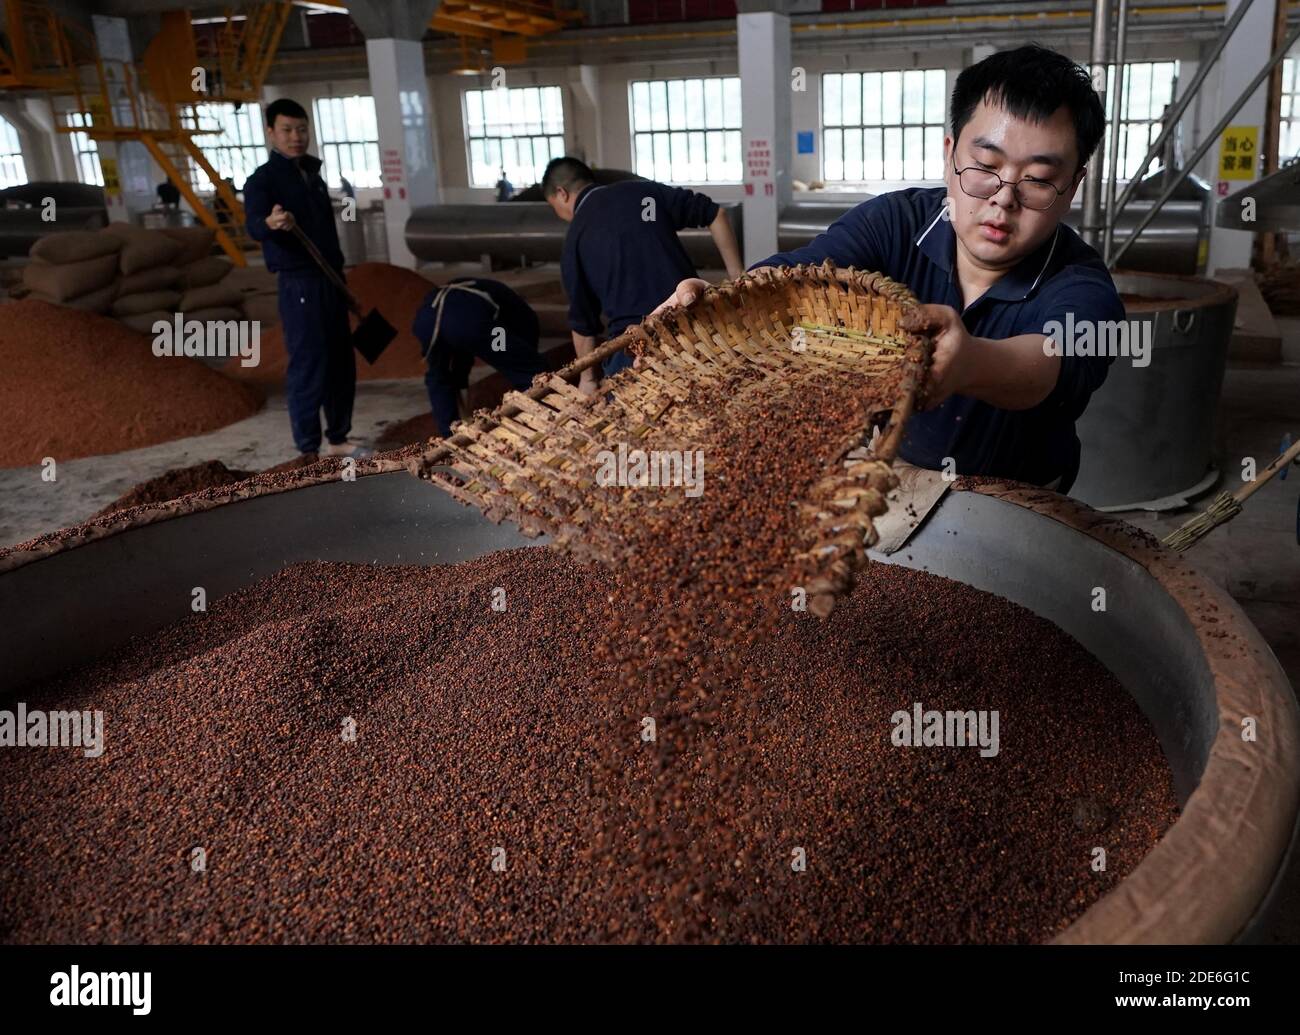 (201129) -- GUIZHOU, Nov. 29, 2020 (Xinhua) -- Hu Meng (R), 26, works at a distillery in Maotai town of Renhuai, southwest China's Guizhou Province, Nov. 28, 2020. Hu graduated from Xihua University in southwestern Chinese city Chengdu and has been working here since this September. Maotai is a small town in Renhuai City in mountainous Guizhou. What distinguishes it from other towns is that it produces a famous brand of Chinese liquor Moutai. The spirit, made from sorghum and wheat, takes up to one year for the whole production process, involving nine times of steaming, eight times of ferment Stock Photo